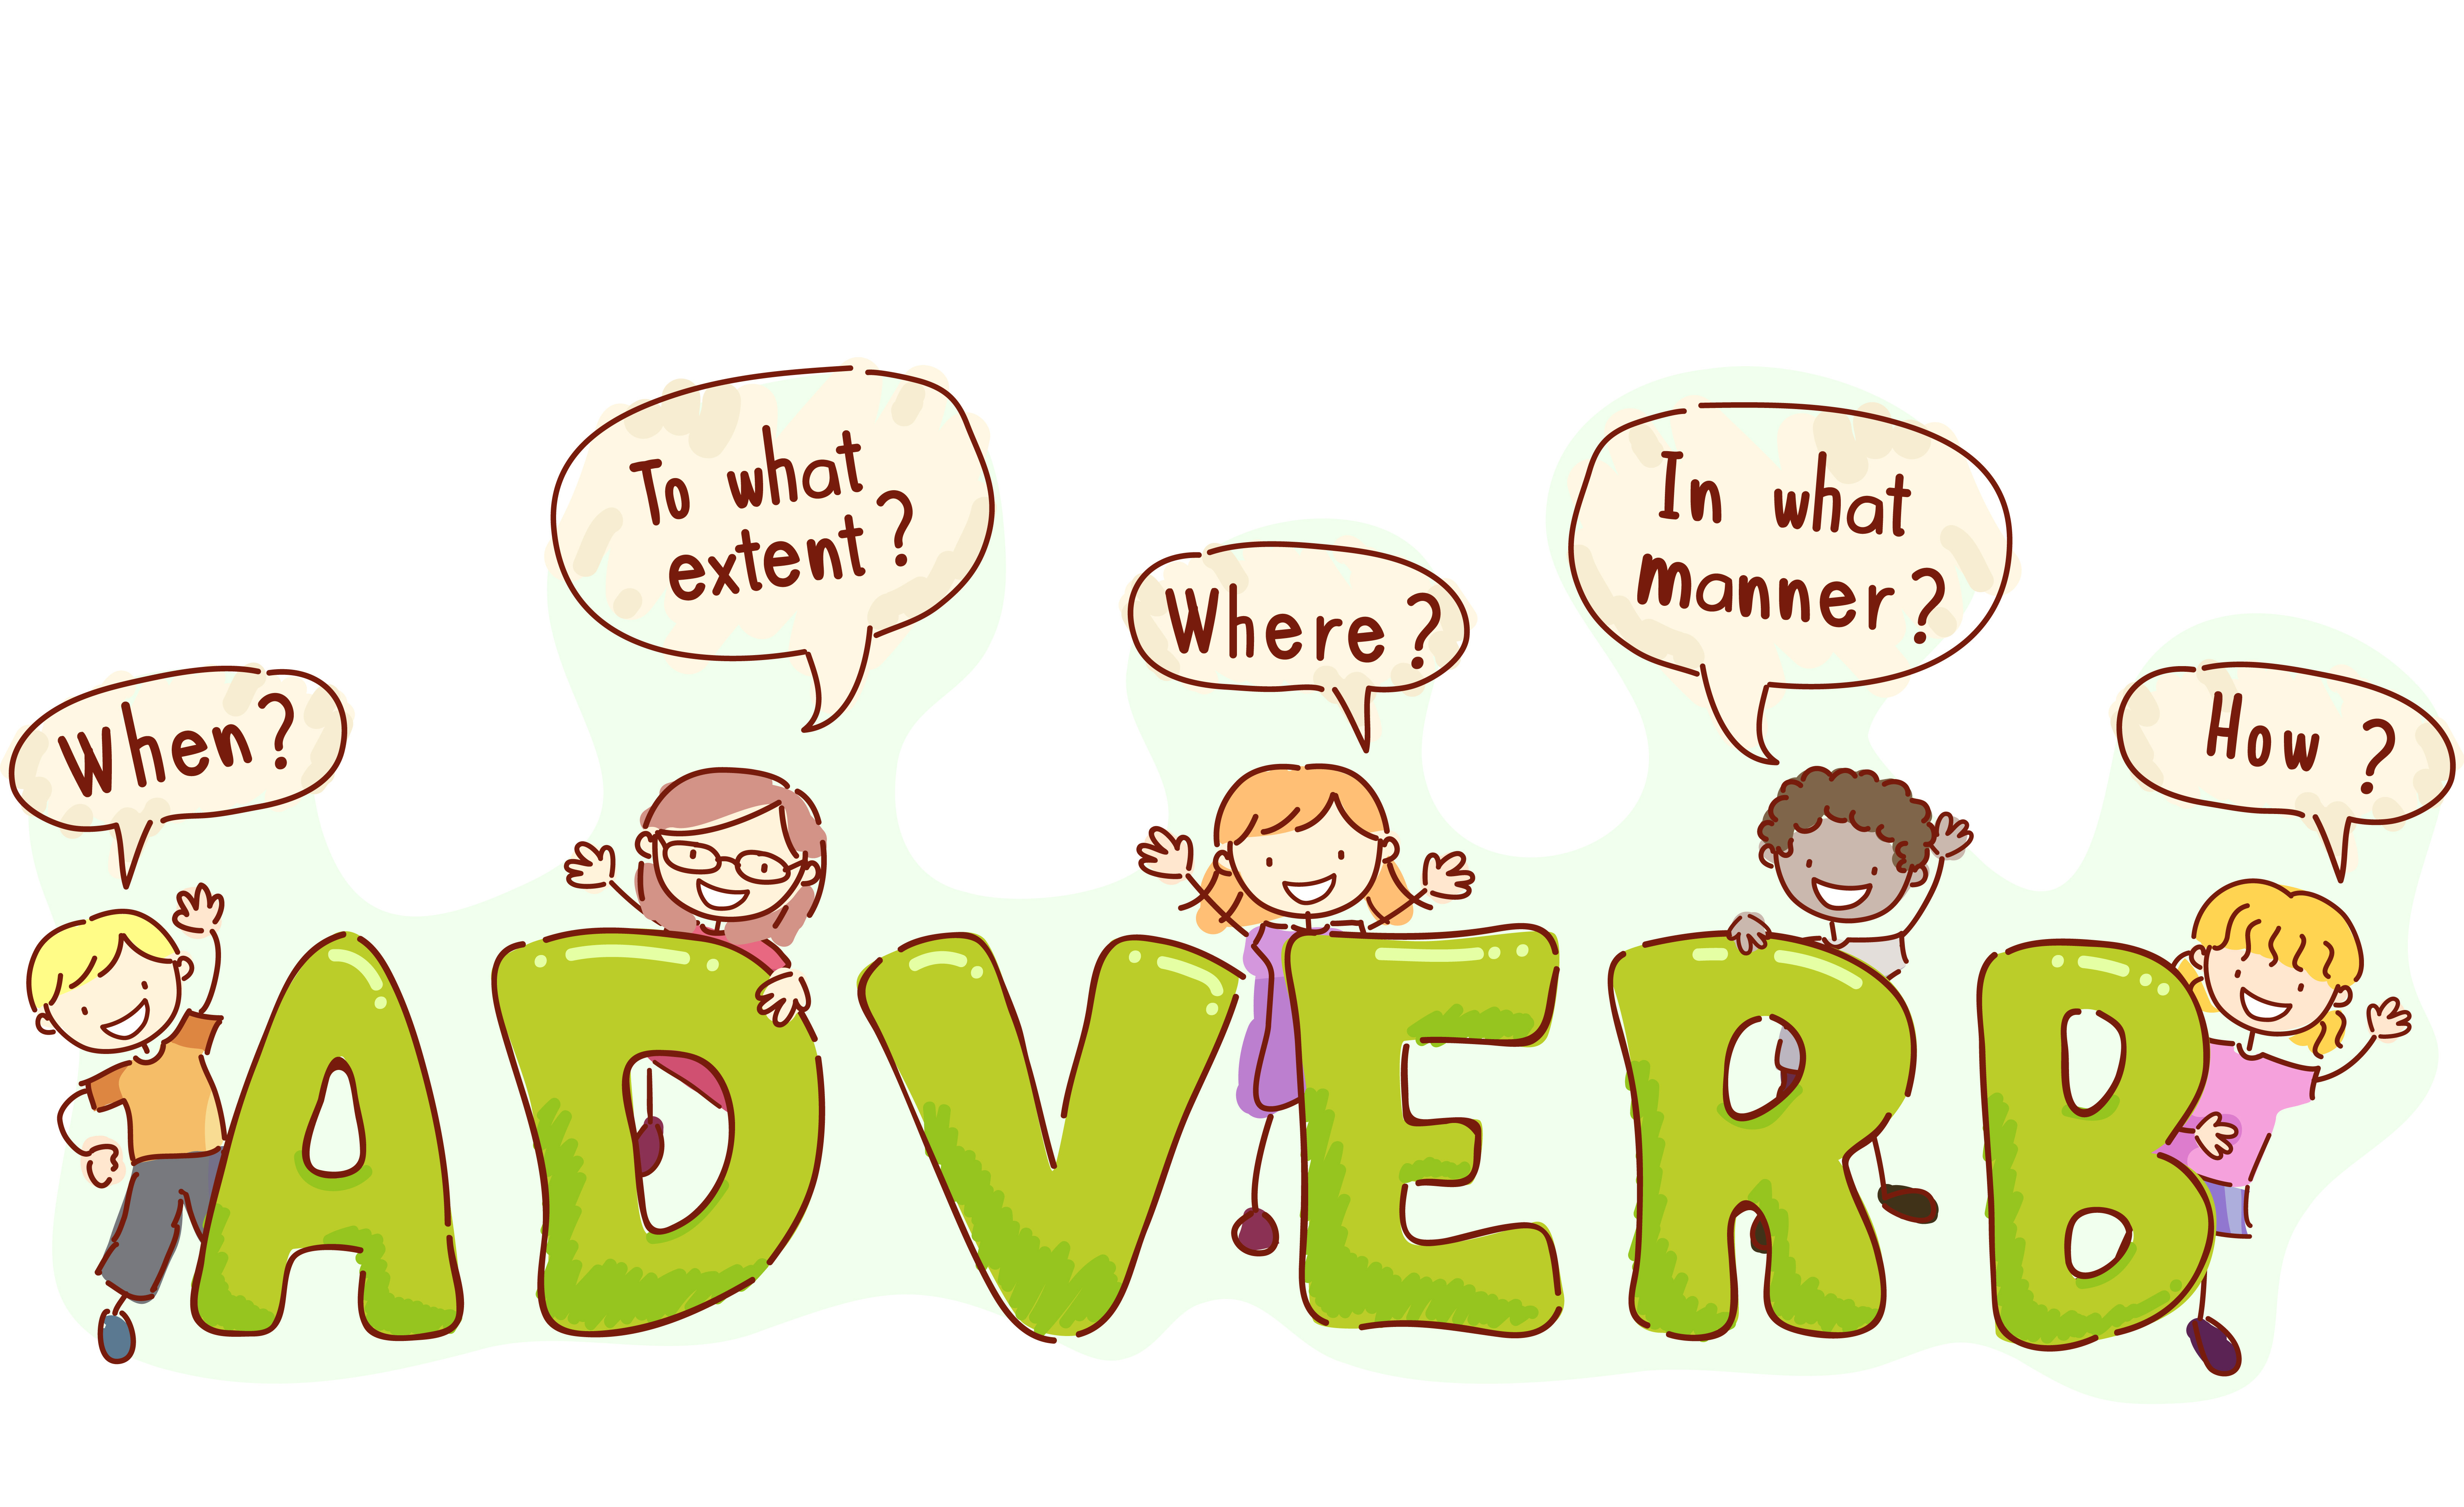 english-choose-the-correct-adverb-level-1-activity-for-kids-primaryleap-co-uk